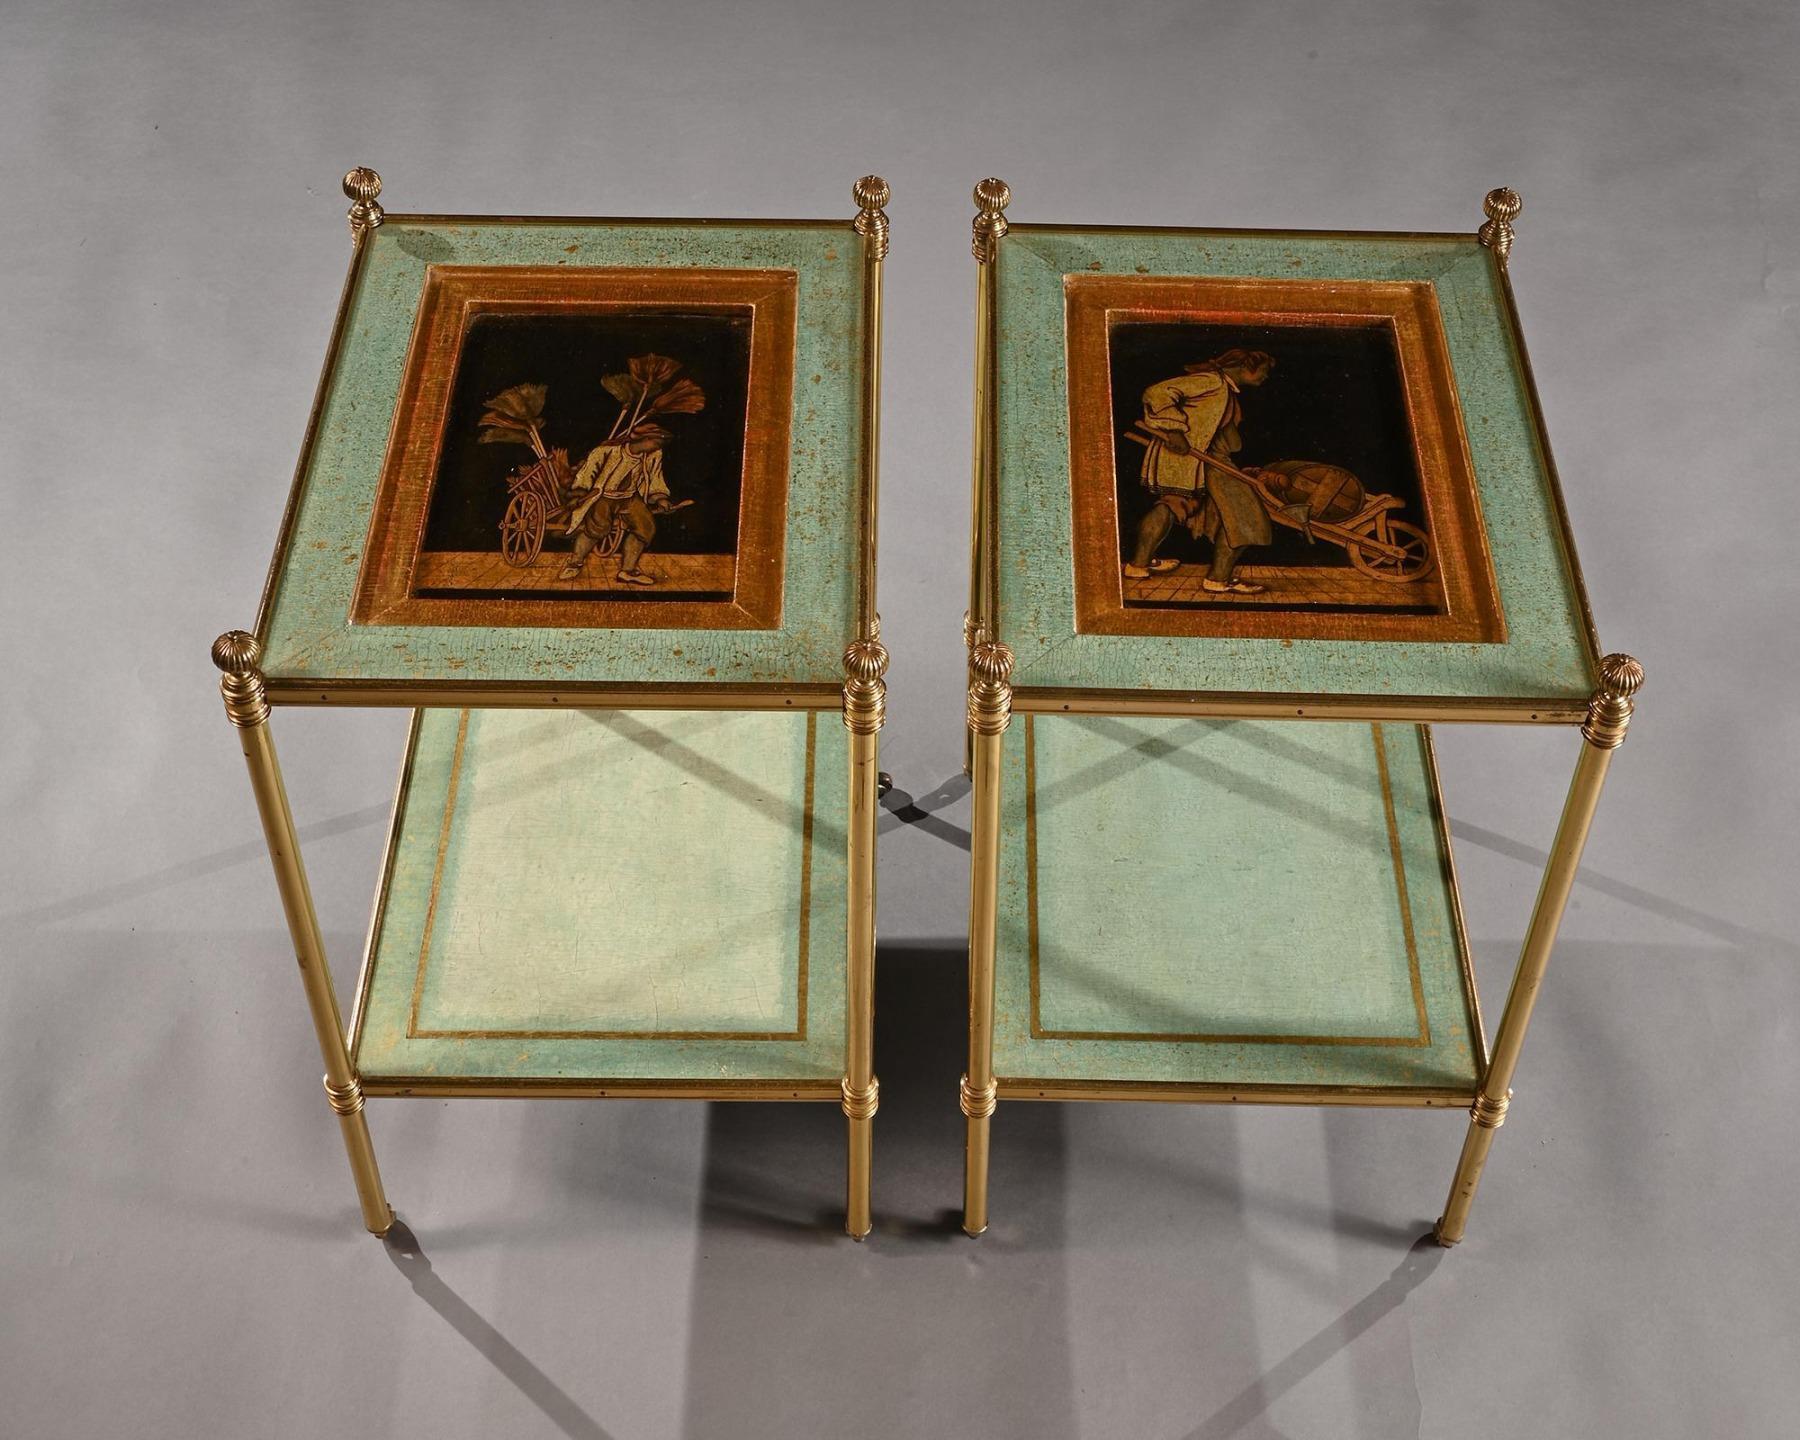 Fine pair of mid 20th century two tier lacquered and parcel gilt green craquele etageres with inset lacquered panels by Mallett London.



England circa Mid 20th Century 



Each rectangular top having recessed lacquered panels above inset